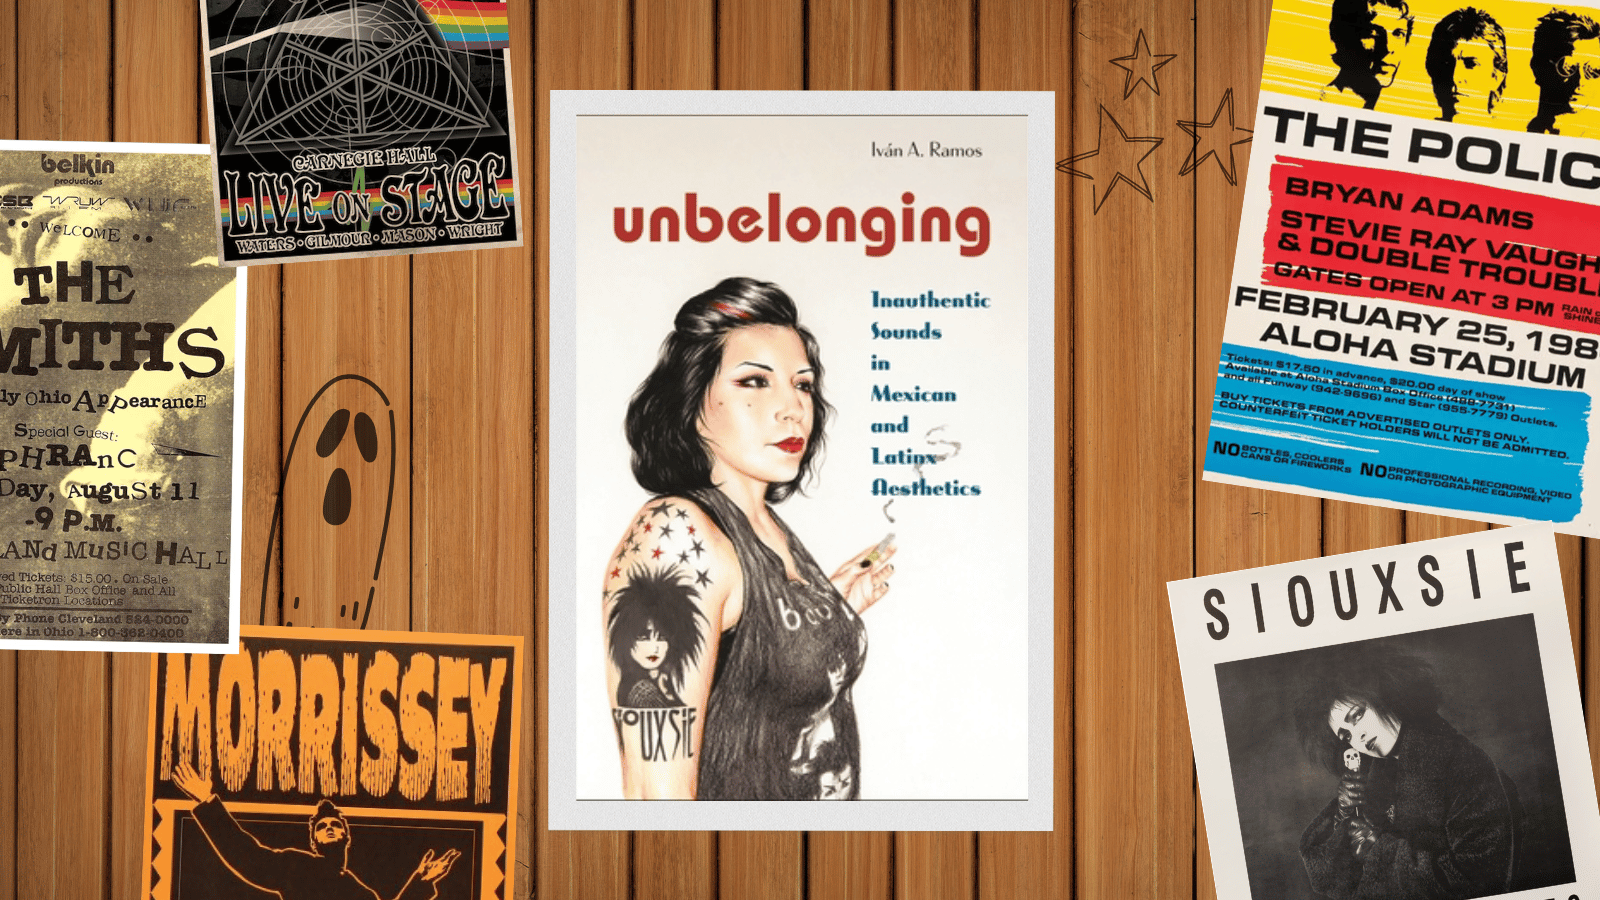 A framed image of the cover of Unbelonging on a wood panelled wall surrounded by sketches and images of posters from bands including Pink Floyd, The Smiths, The Police, Souxsie and the Banshees, and Morissey